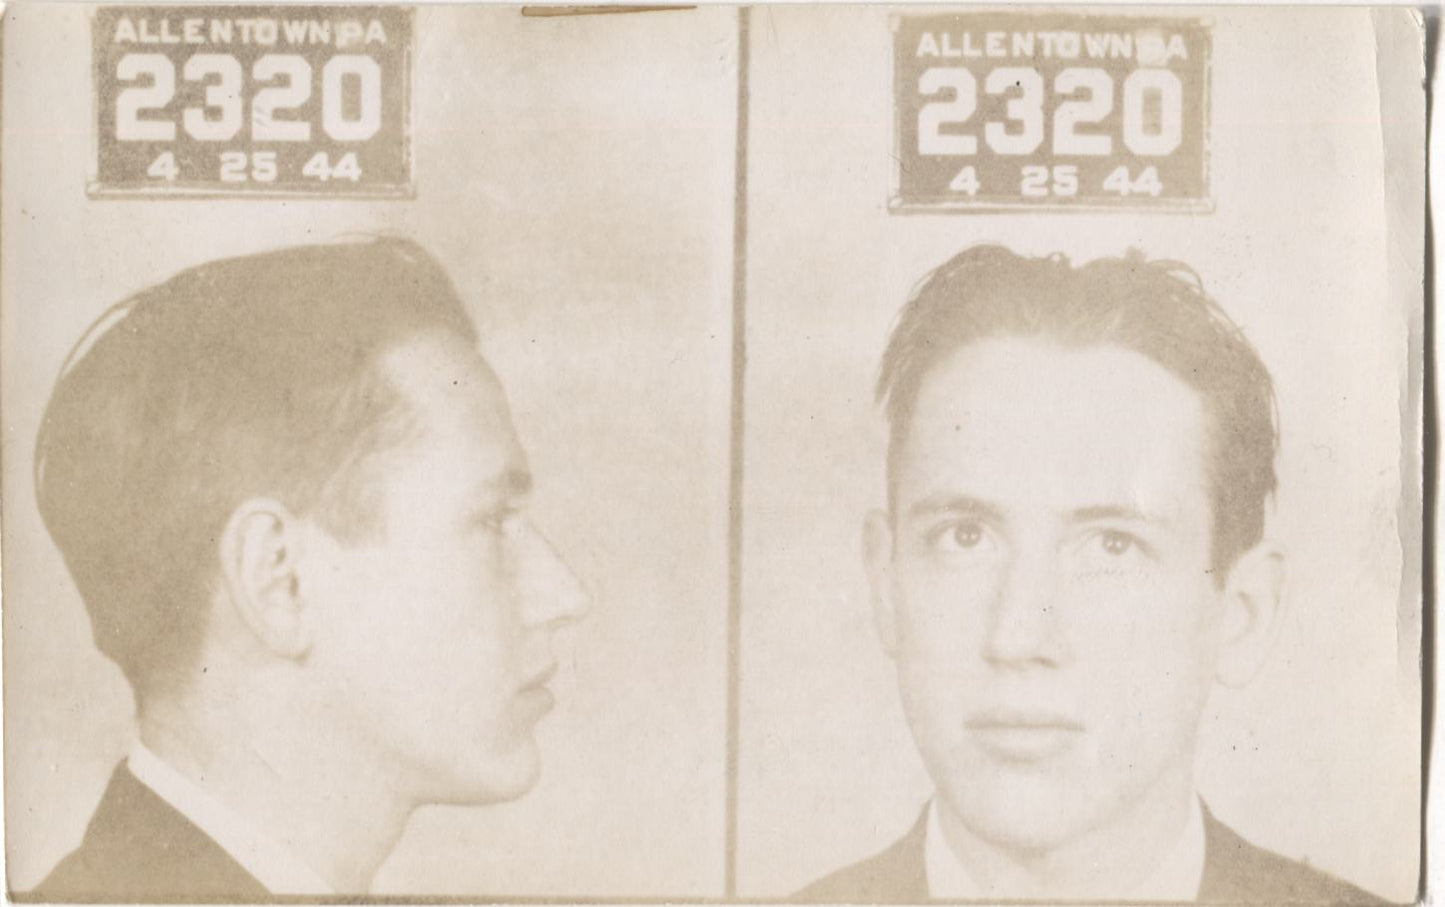 William "Chicken" Roth Mugshot - Arrested on 4/25/1944 for Bookmaking